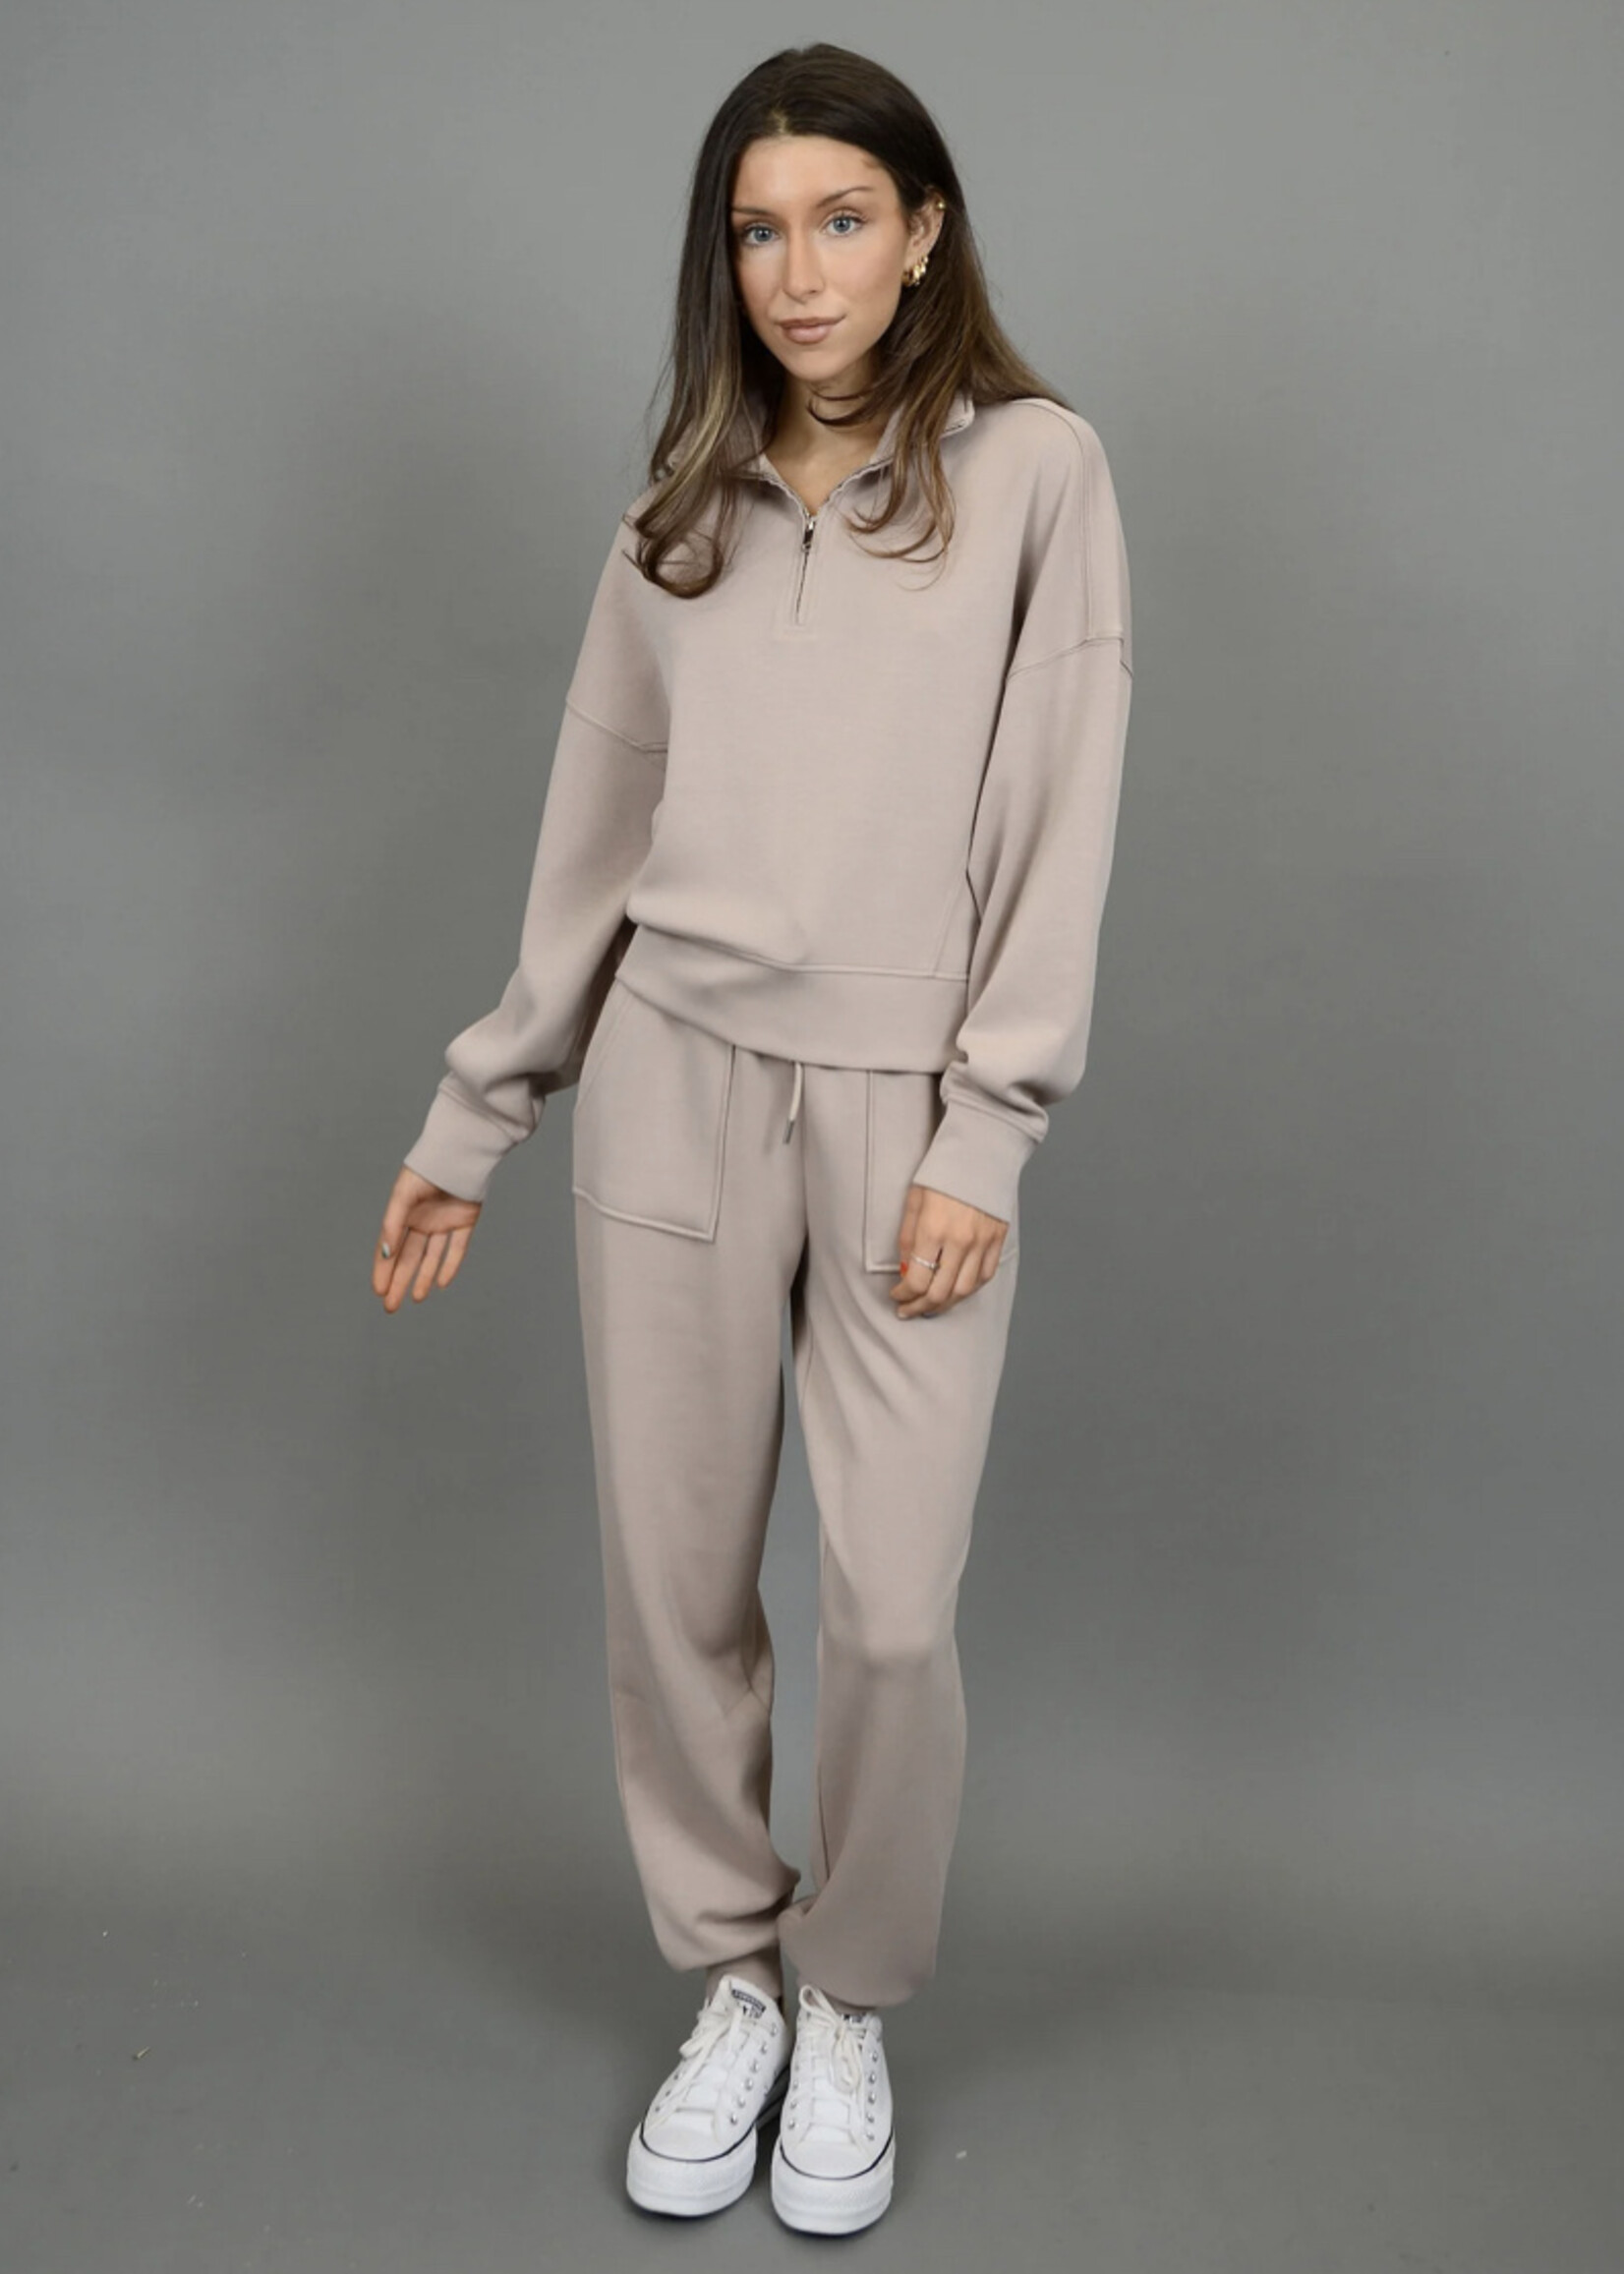 RD STYLE Joselle Soft Knit Jogger